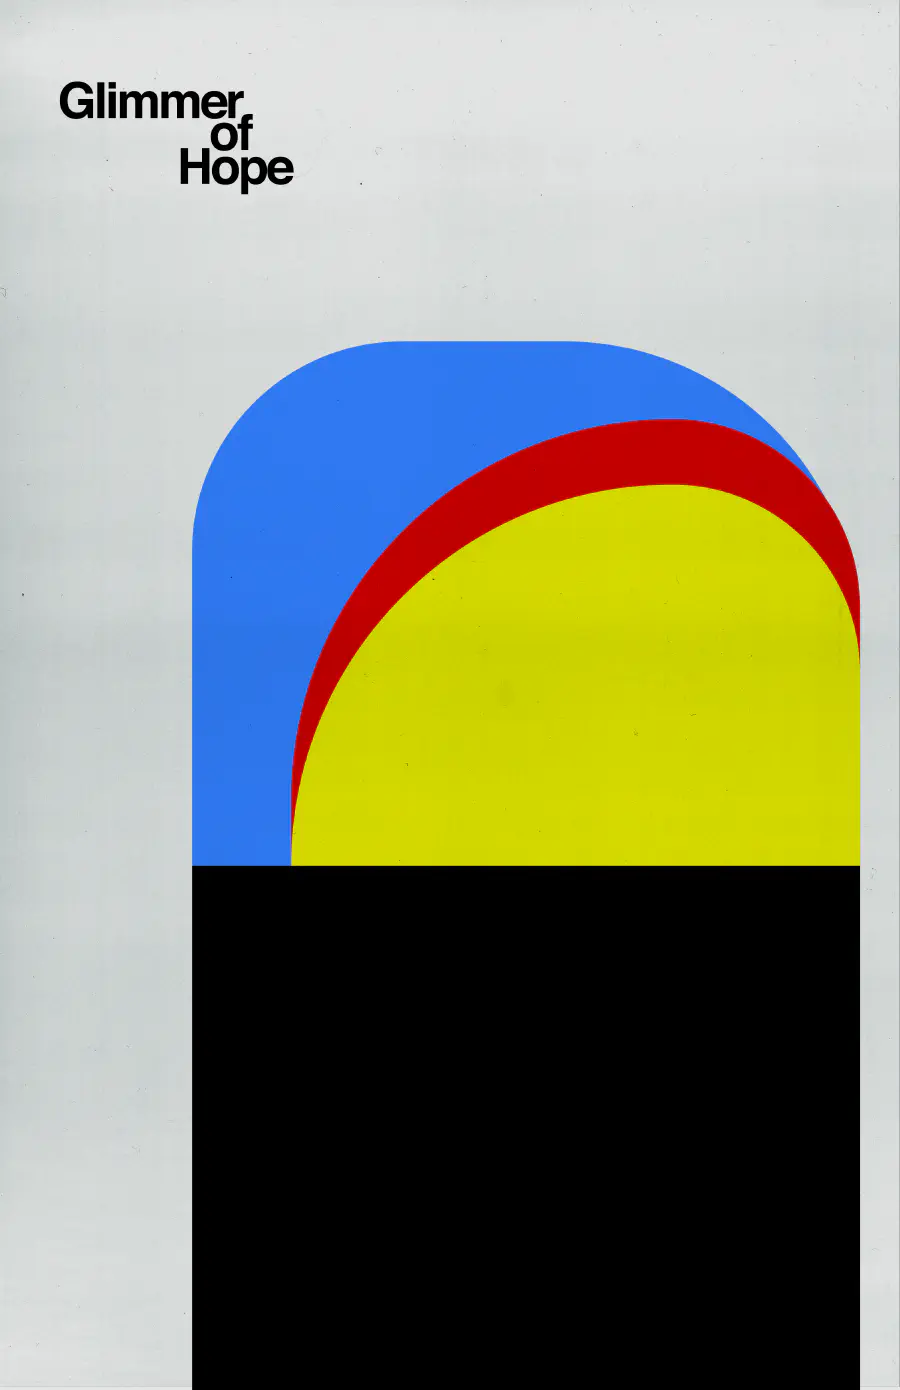 Graphic design project that shows a white background with a rounded rectangle with a black bottom and blue, red, and yellow top.